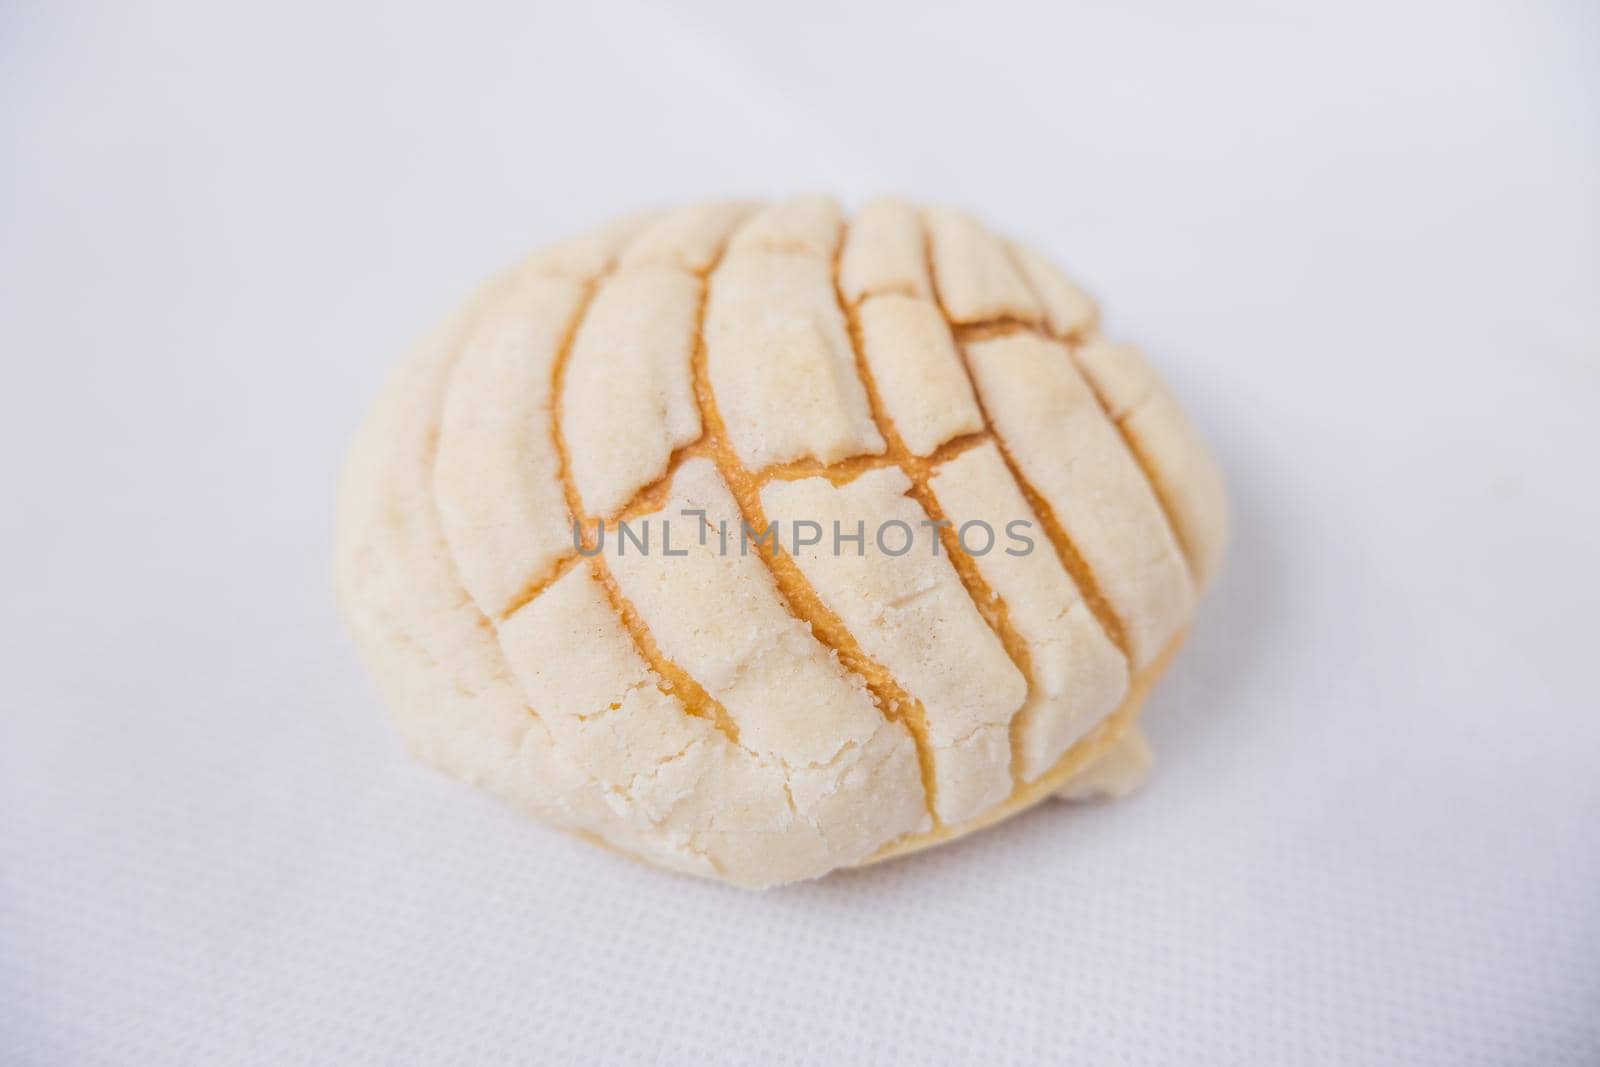 Piece of vanilla sweet bread isolated on white table from above. Top view of classic Mexican bread known as concha on table. Traditional Mexican desserts